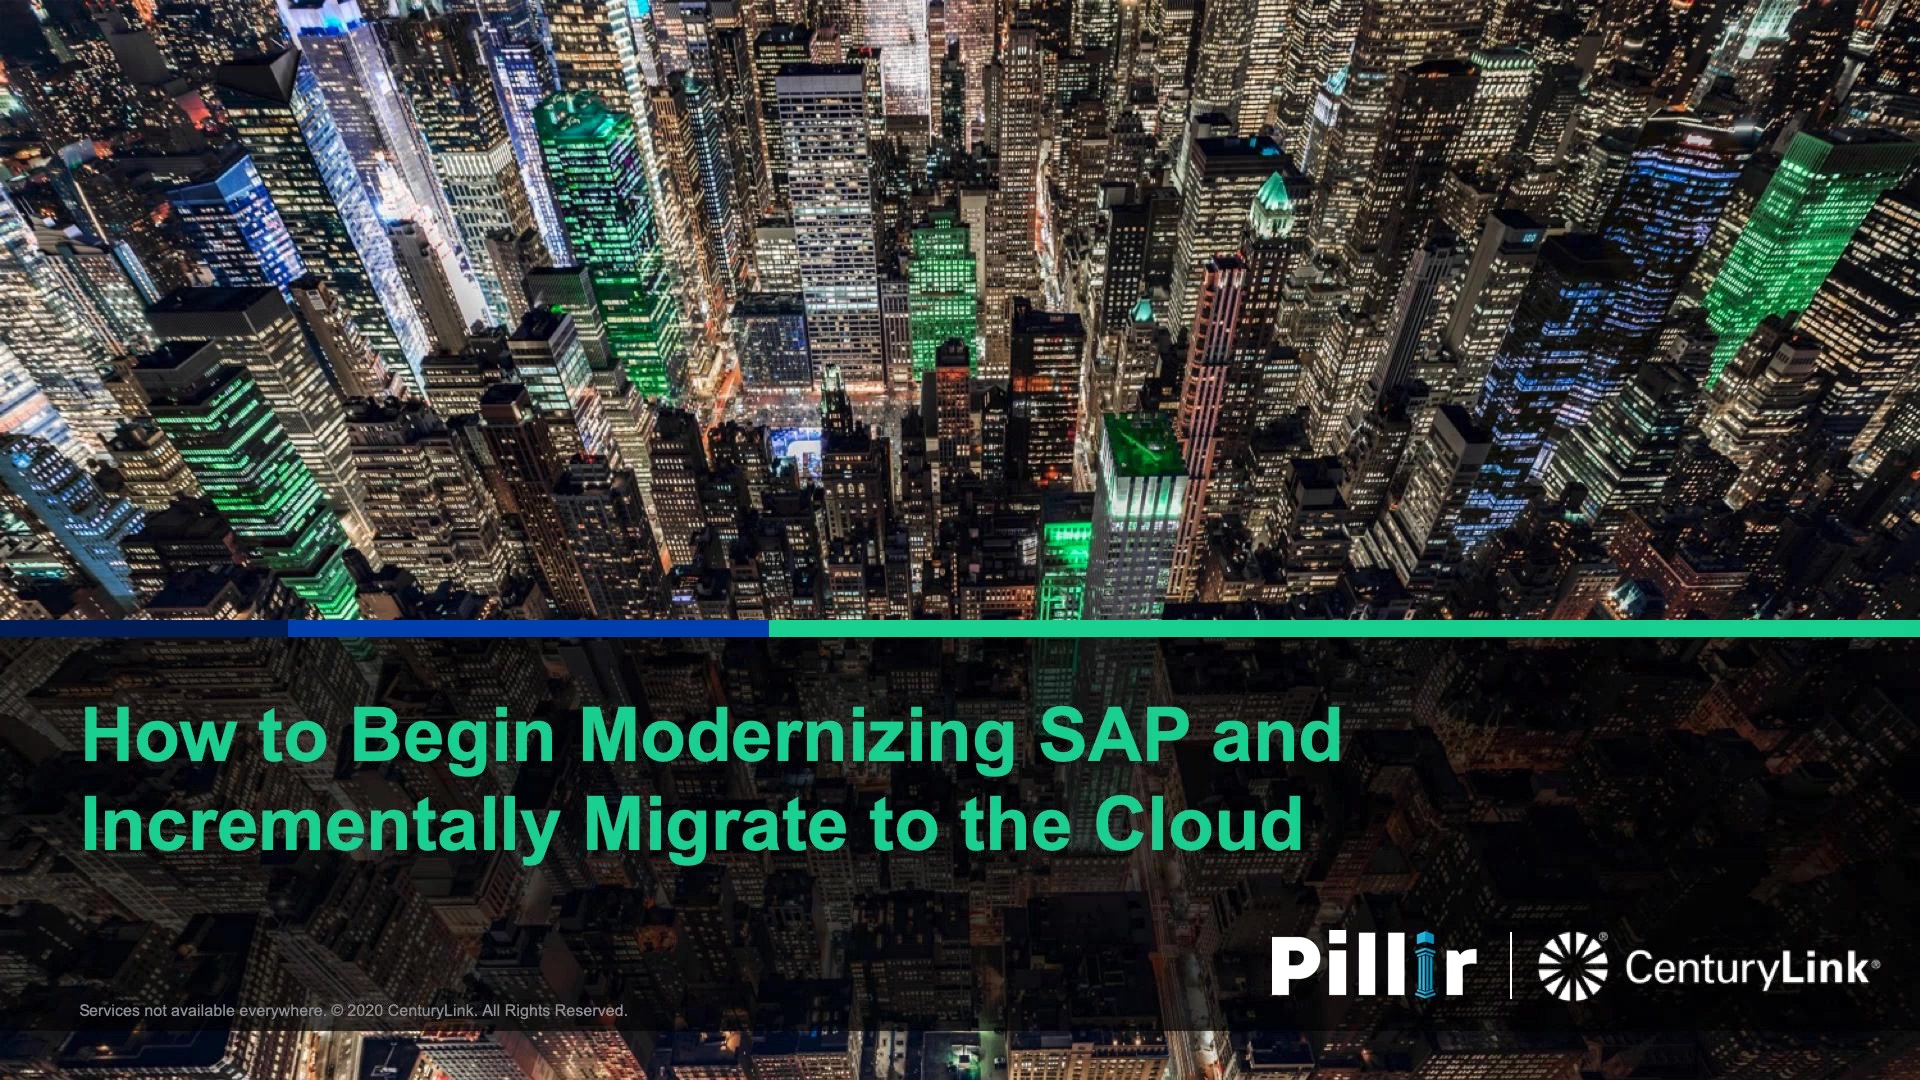 Webinar Recording - First Steps to Incrementally Migrate SAP to the Cloud